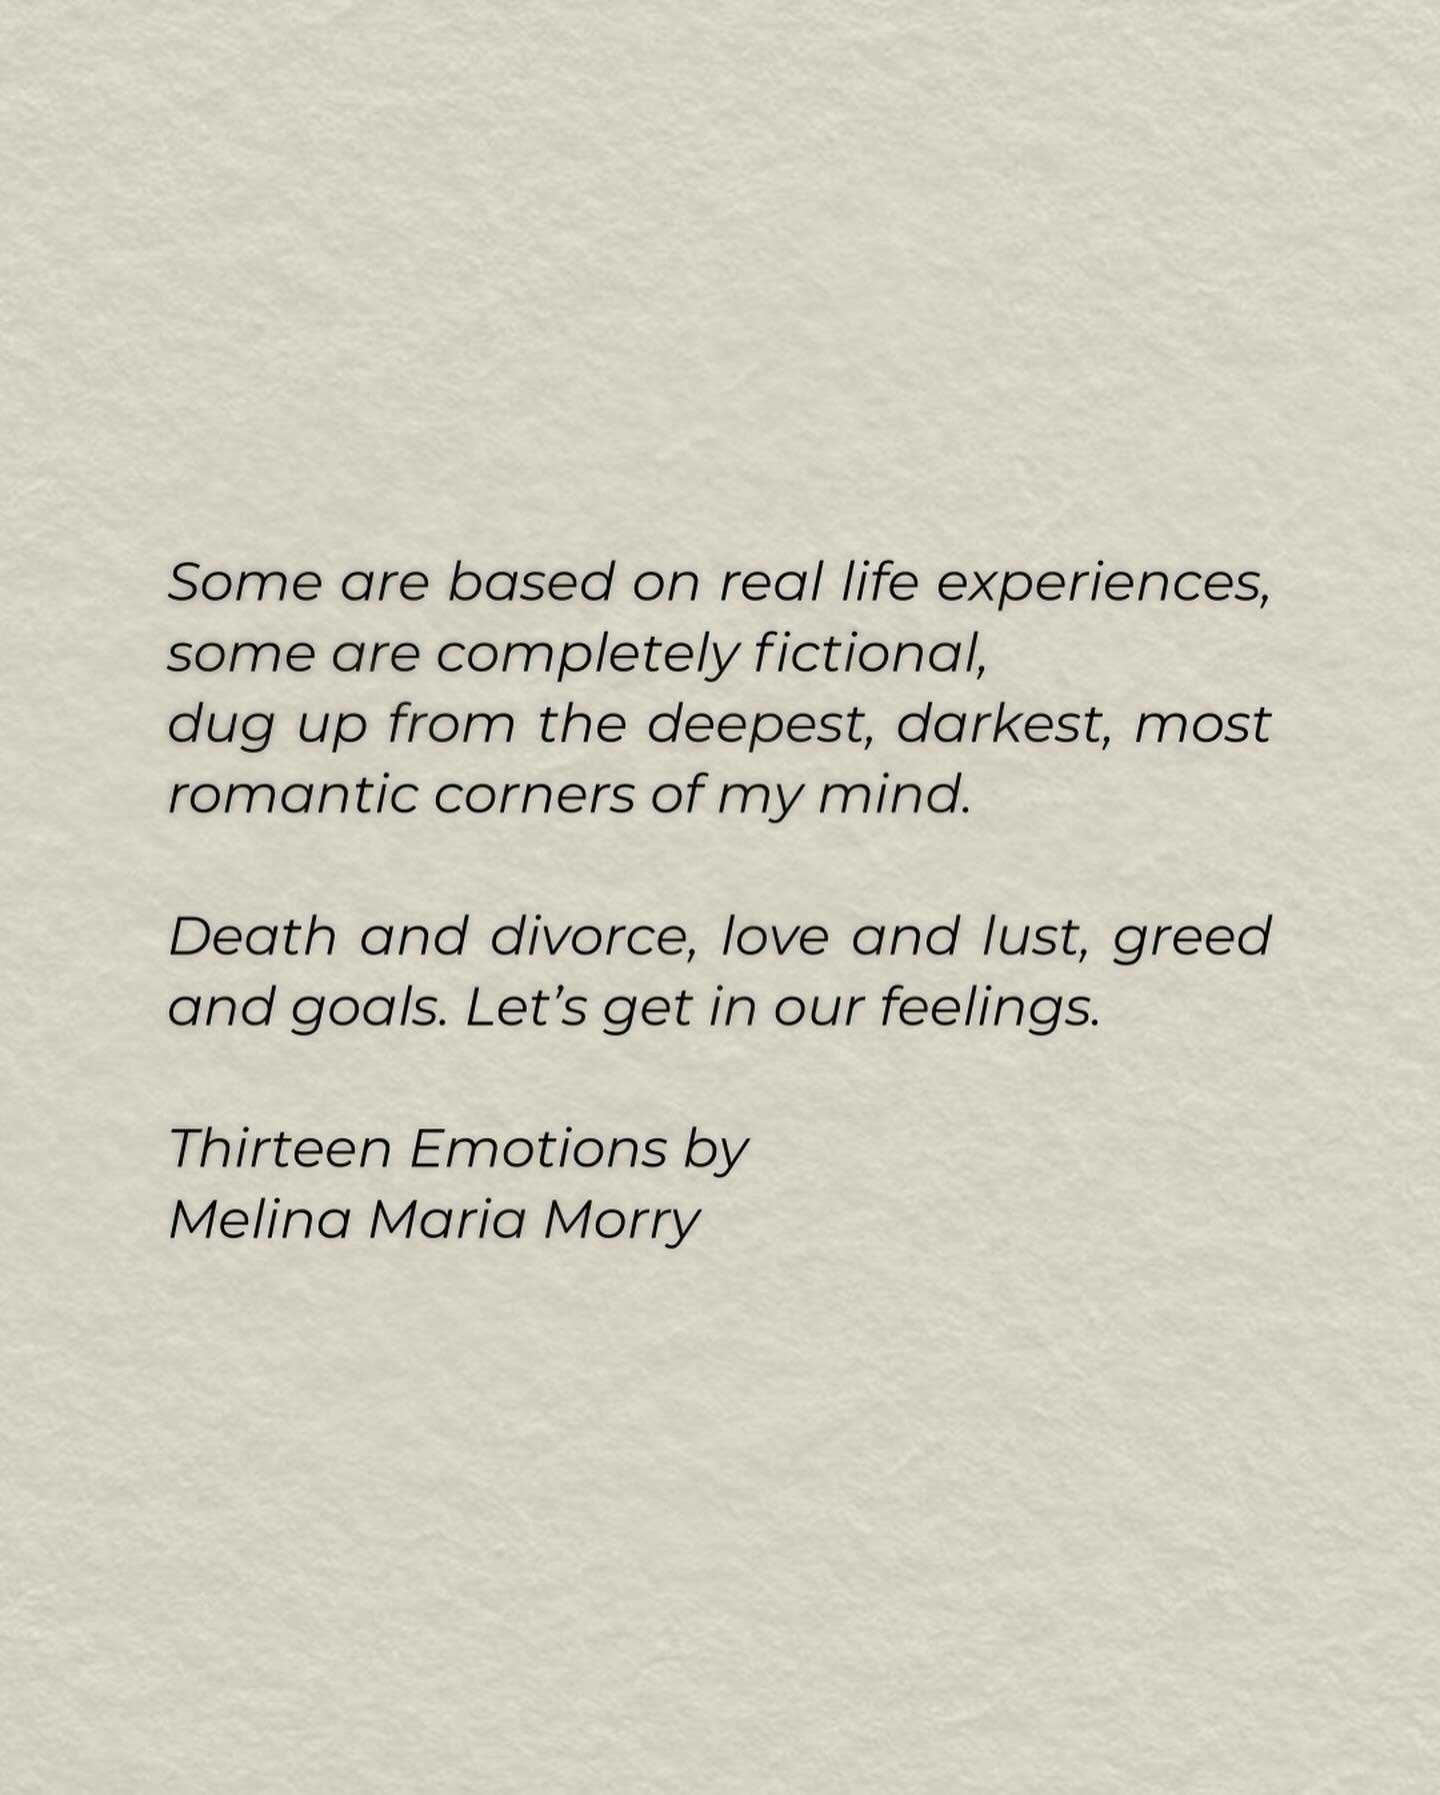 💔 THIRTEEN EMOTIONS 🥀 Swipe to see the cover 🥺 A proof copy is on its way to me so I can review the book in person before it publishes worldwide on June 1st!!! There is a total of 18 #shortstories inspired by cancer, divorce, death, love, lust, ad